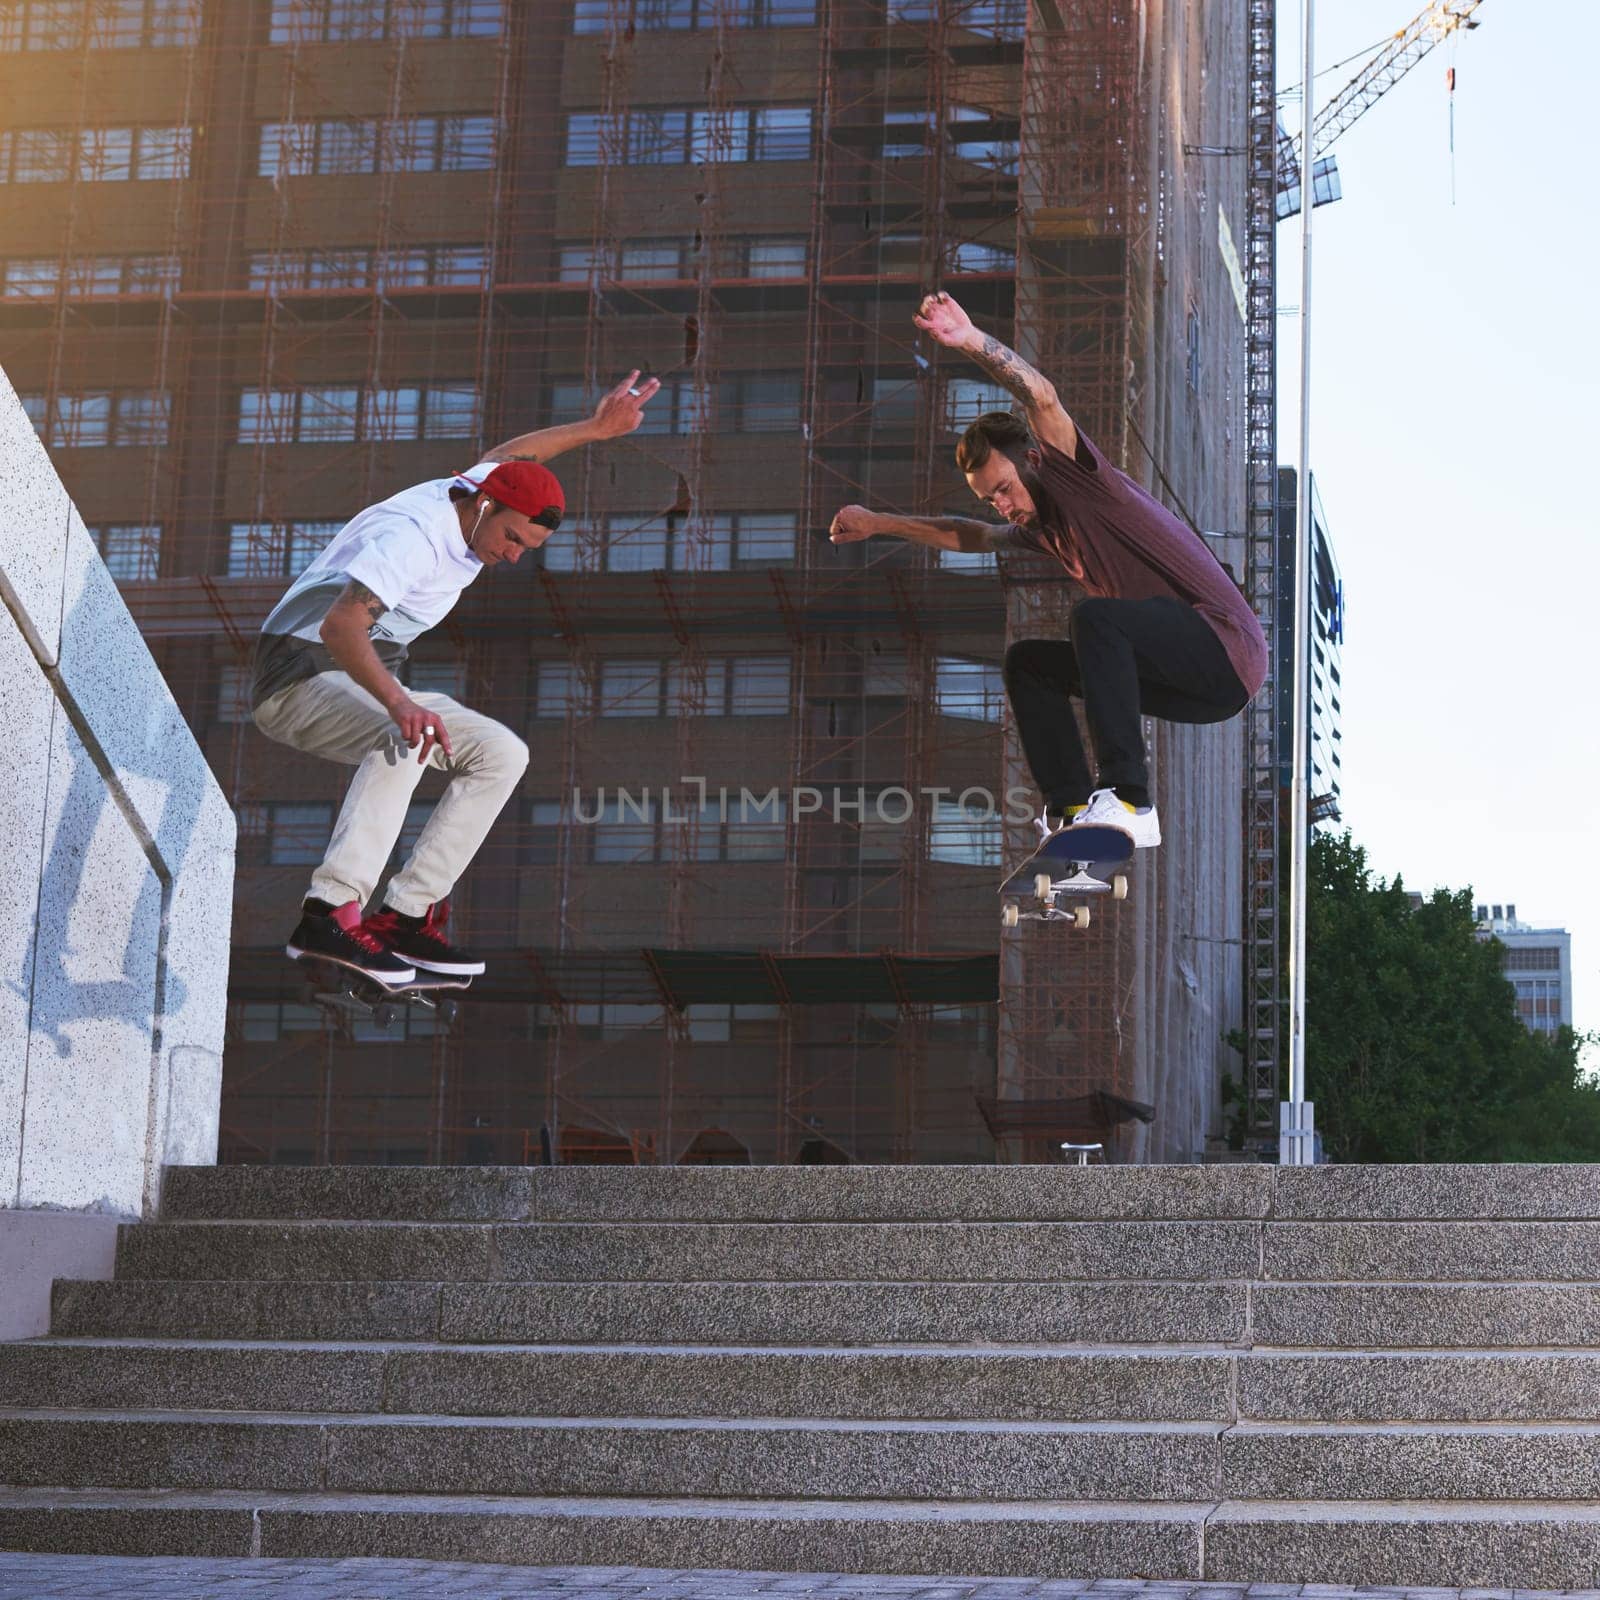 It always seems impossible until its done. two young men skating in the city